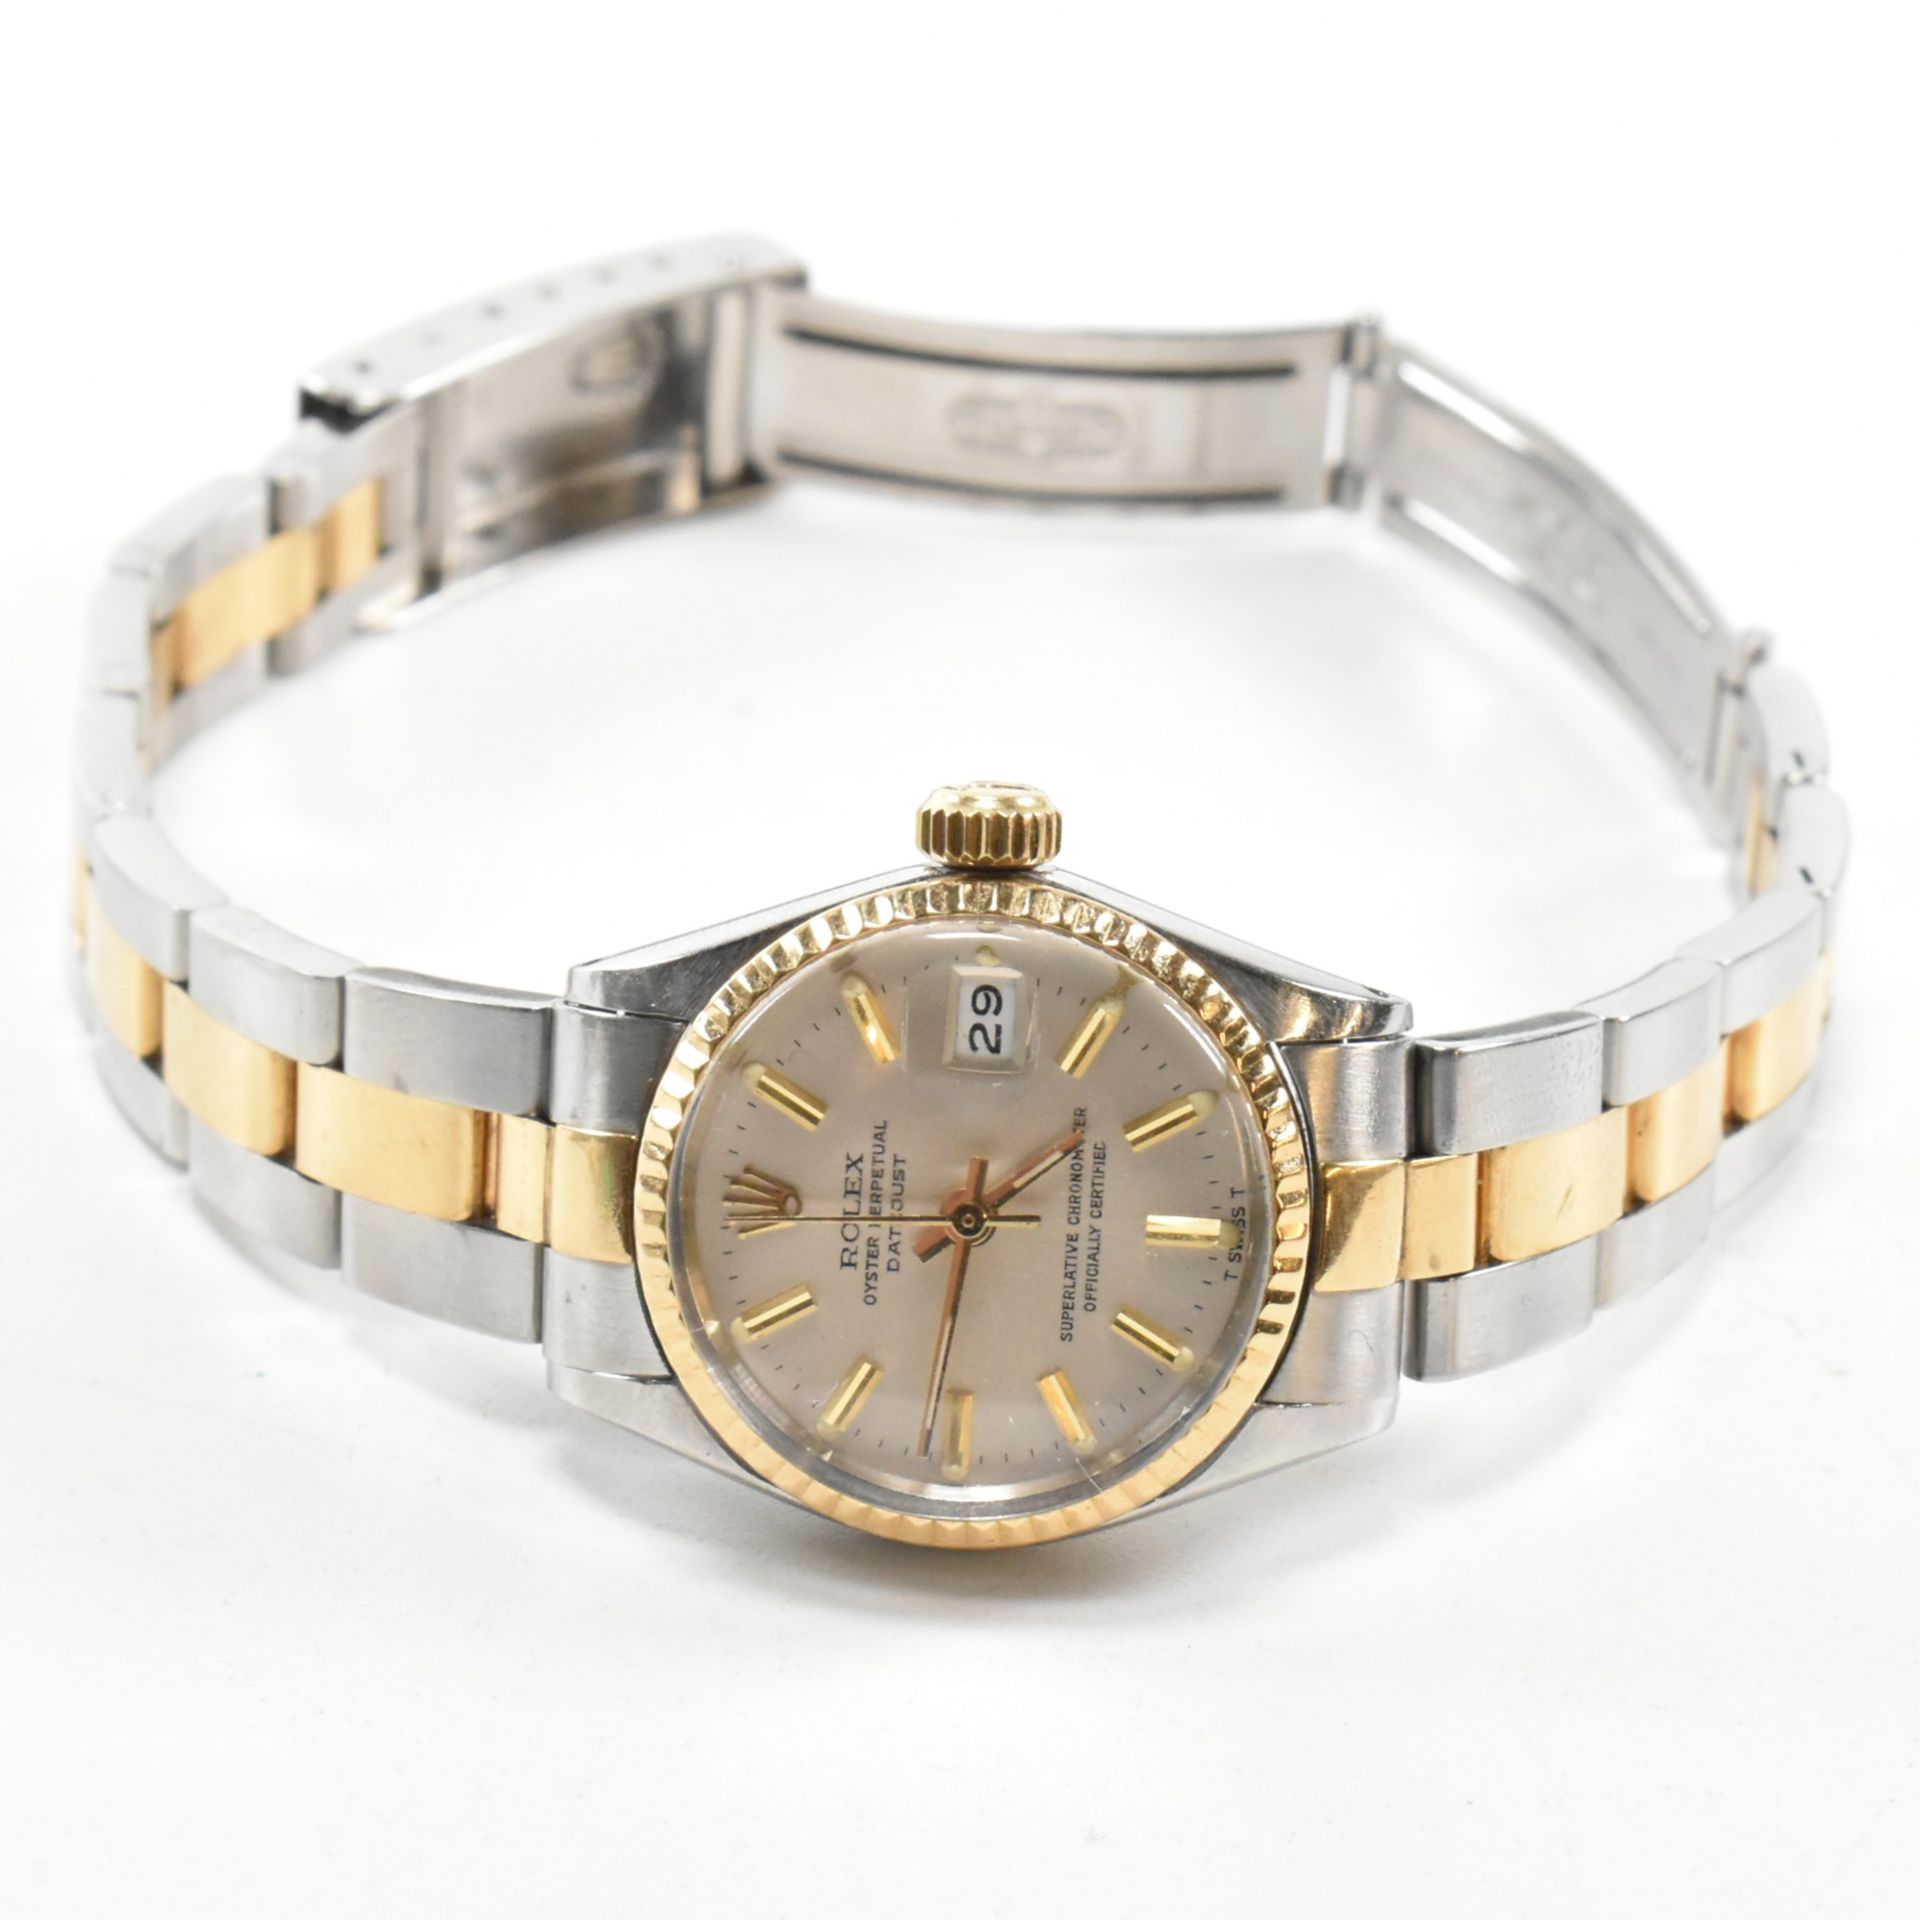 ROLEX OYSTER PERPETUAL DATEJUST LADIES CHRONOMETER - Image 2 of 5